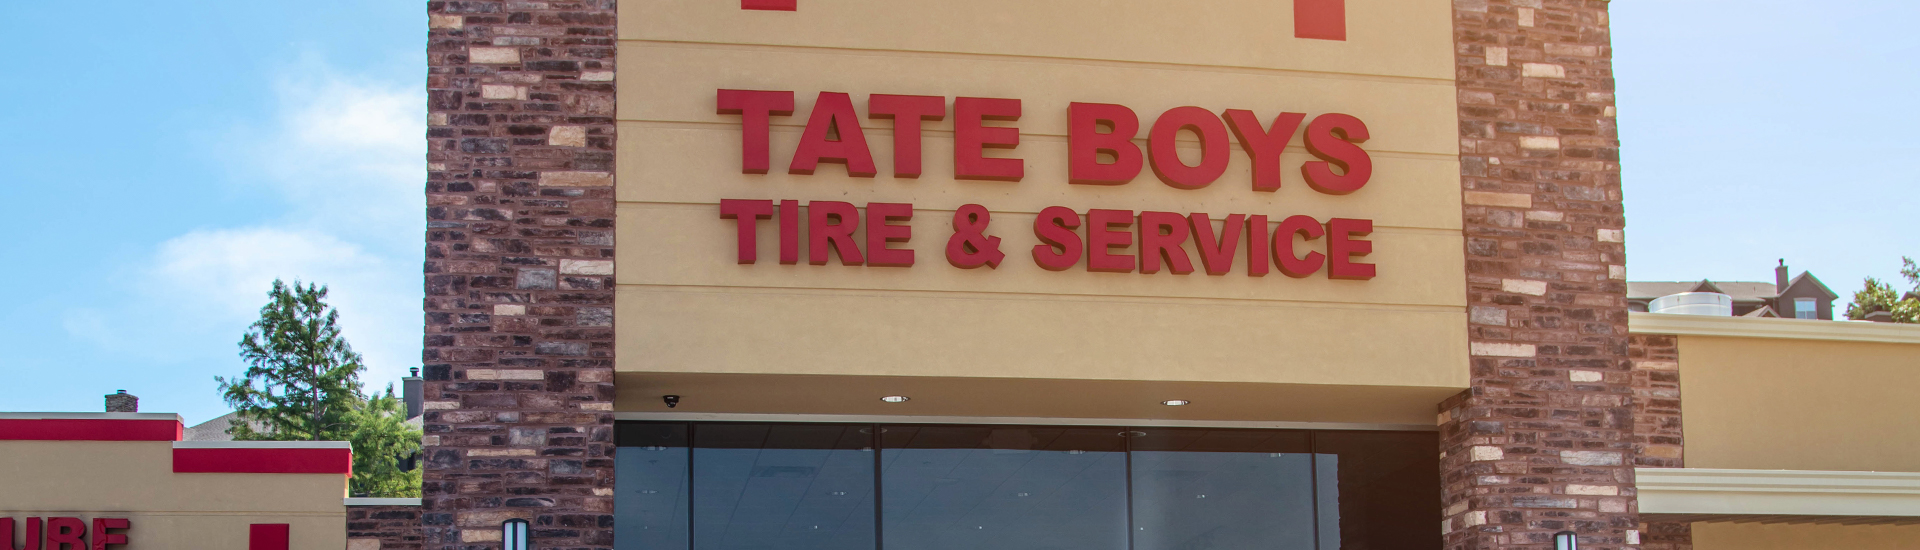 tate boys tire and service location front